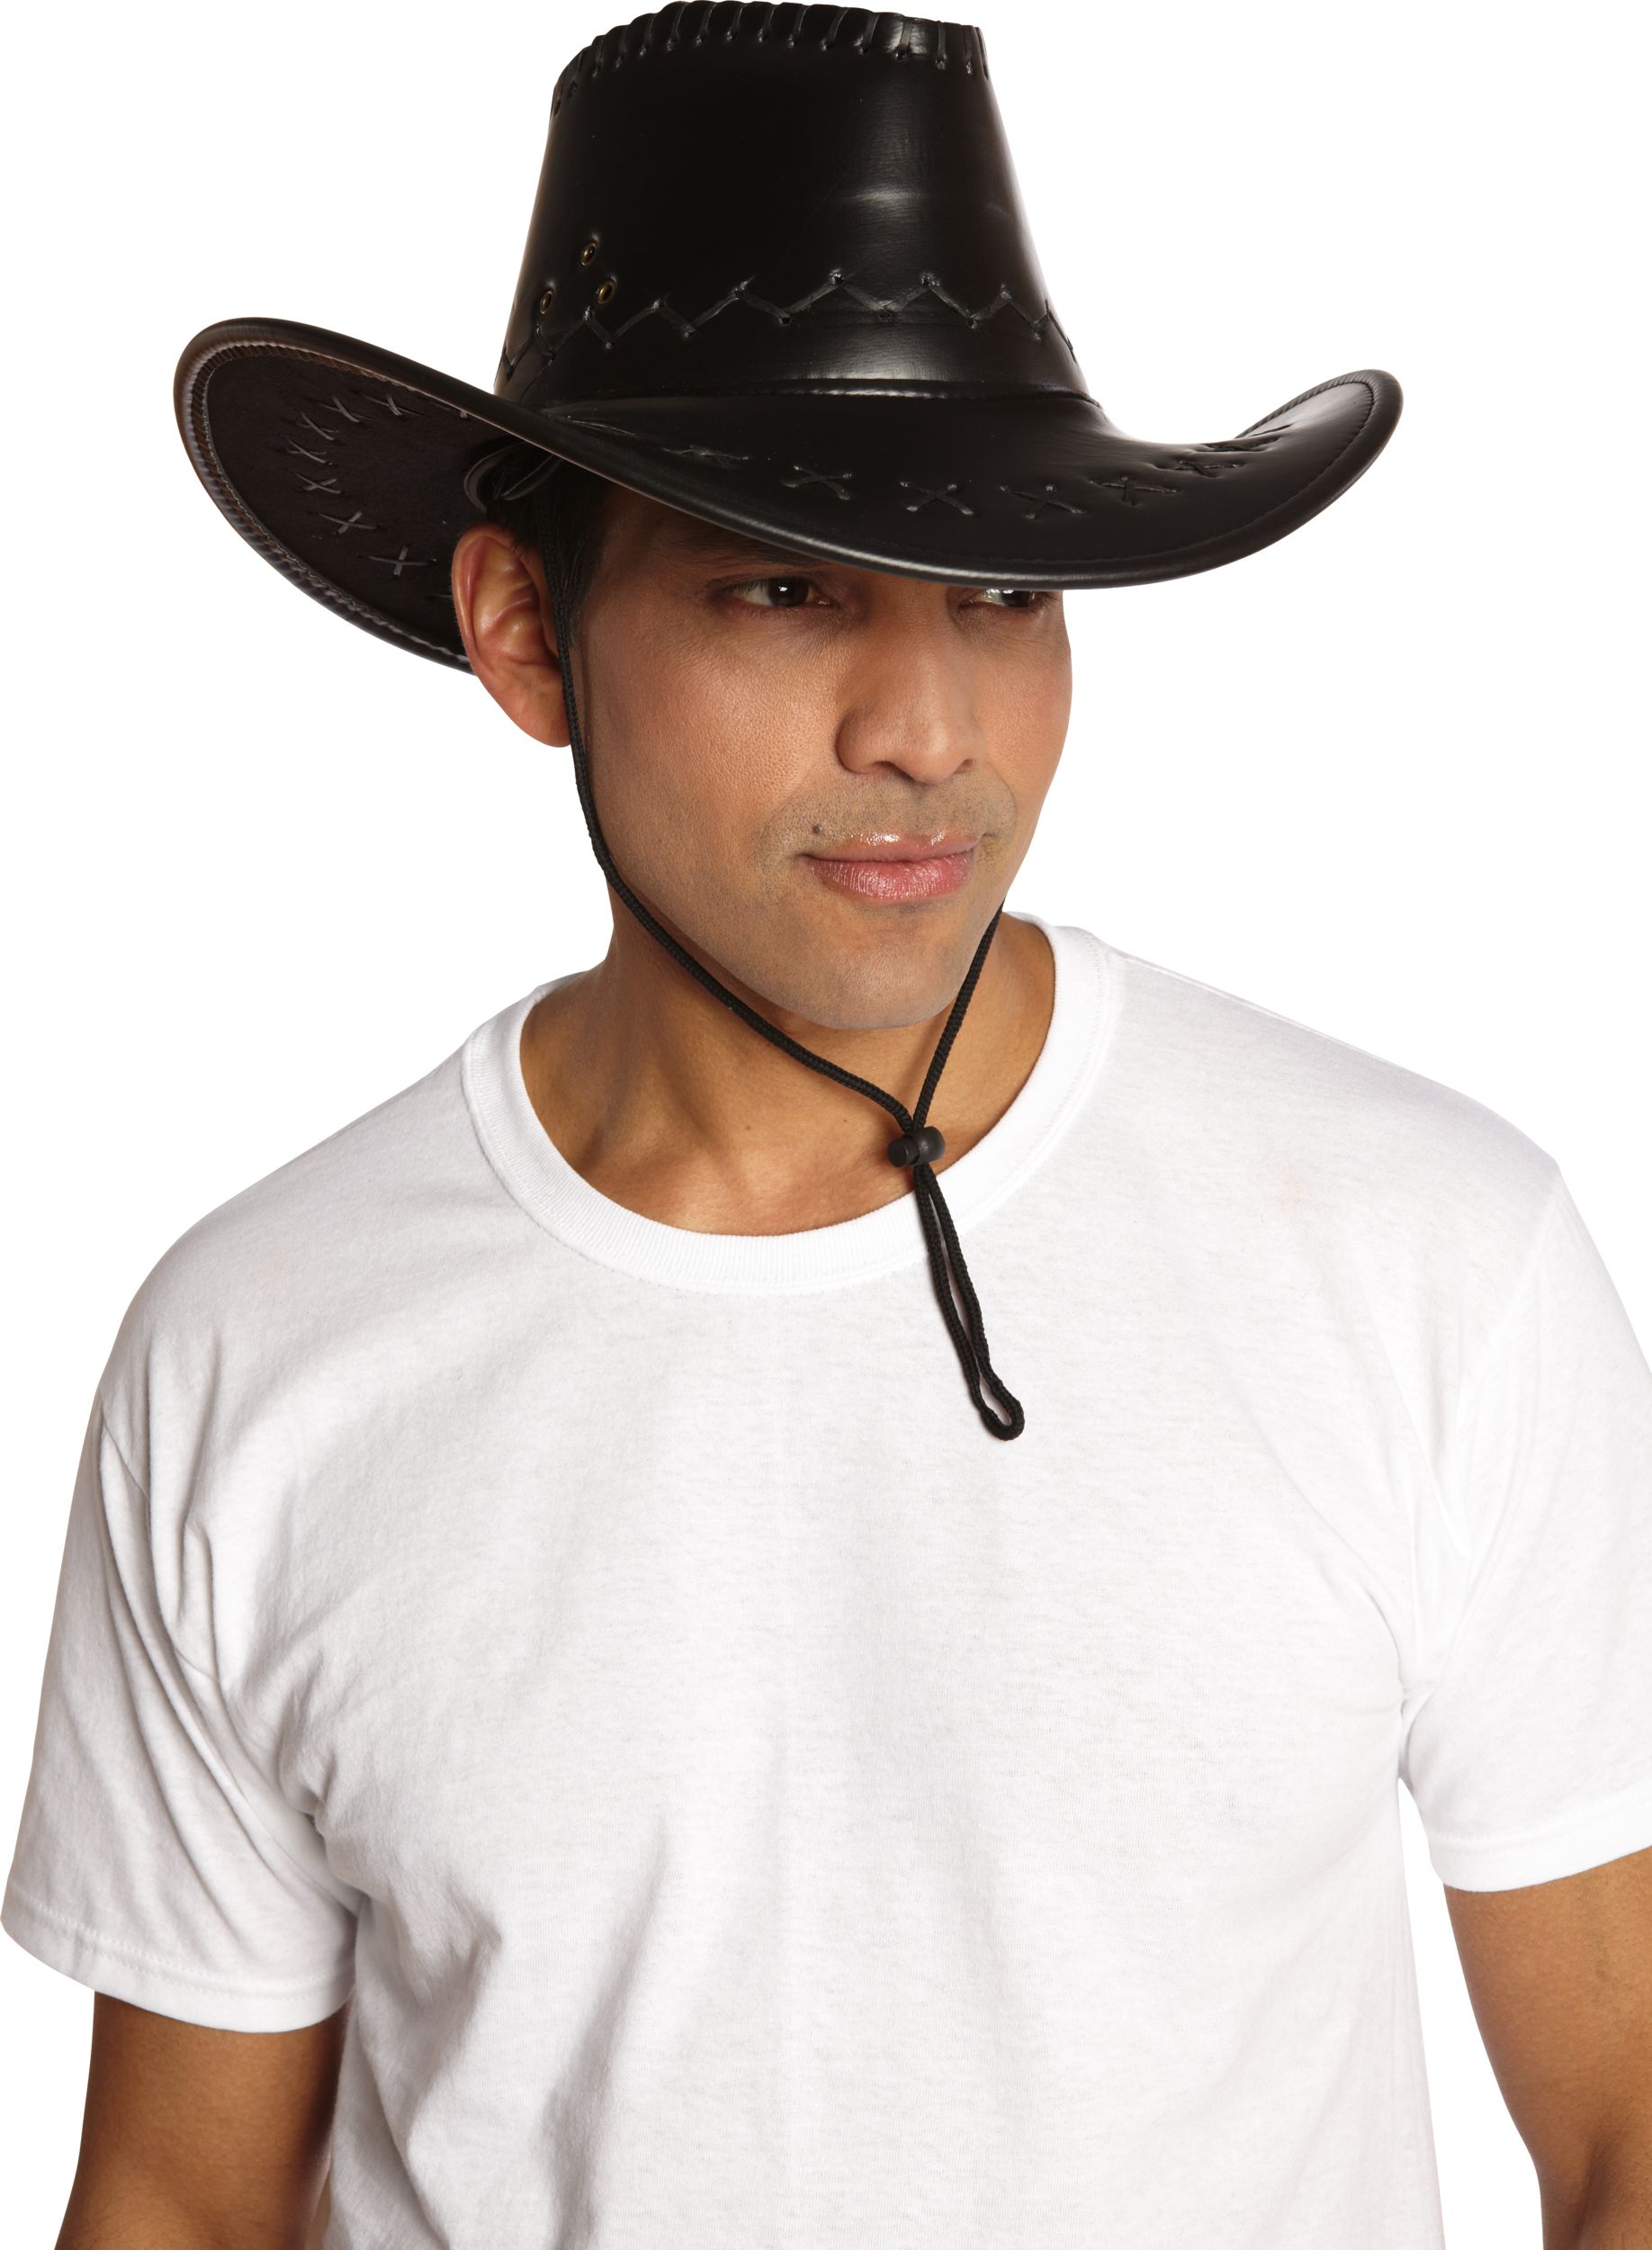 Western Cowboy Hat with Bull Head Pendant, Black/Silver, One Size, Wearable  Costume Accessory for Halloween